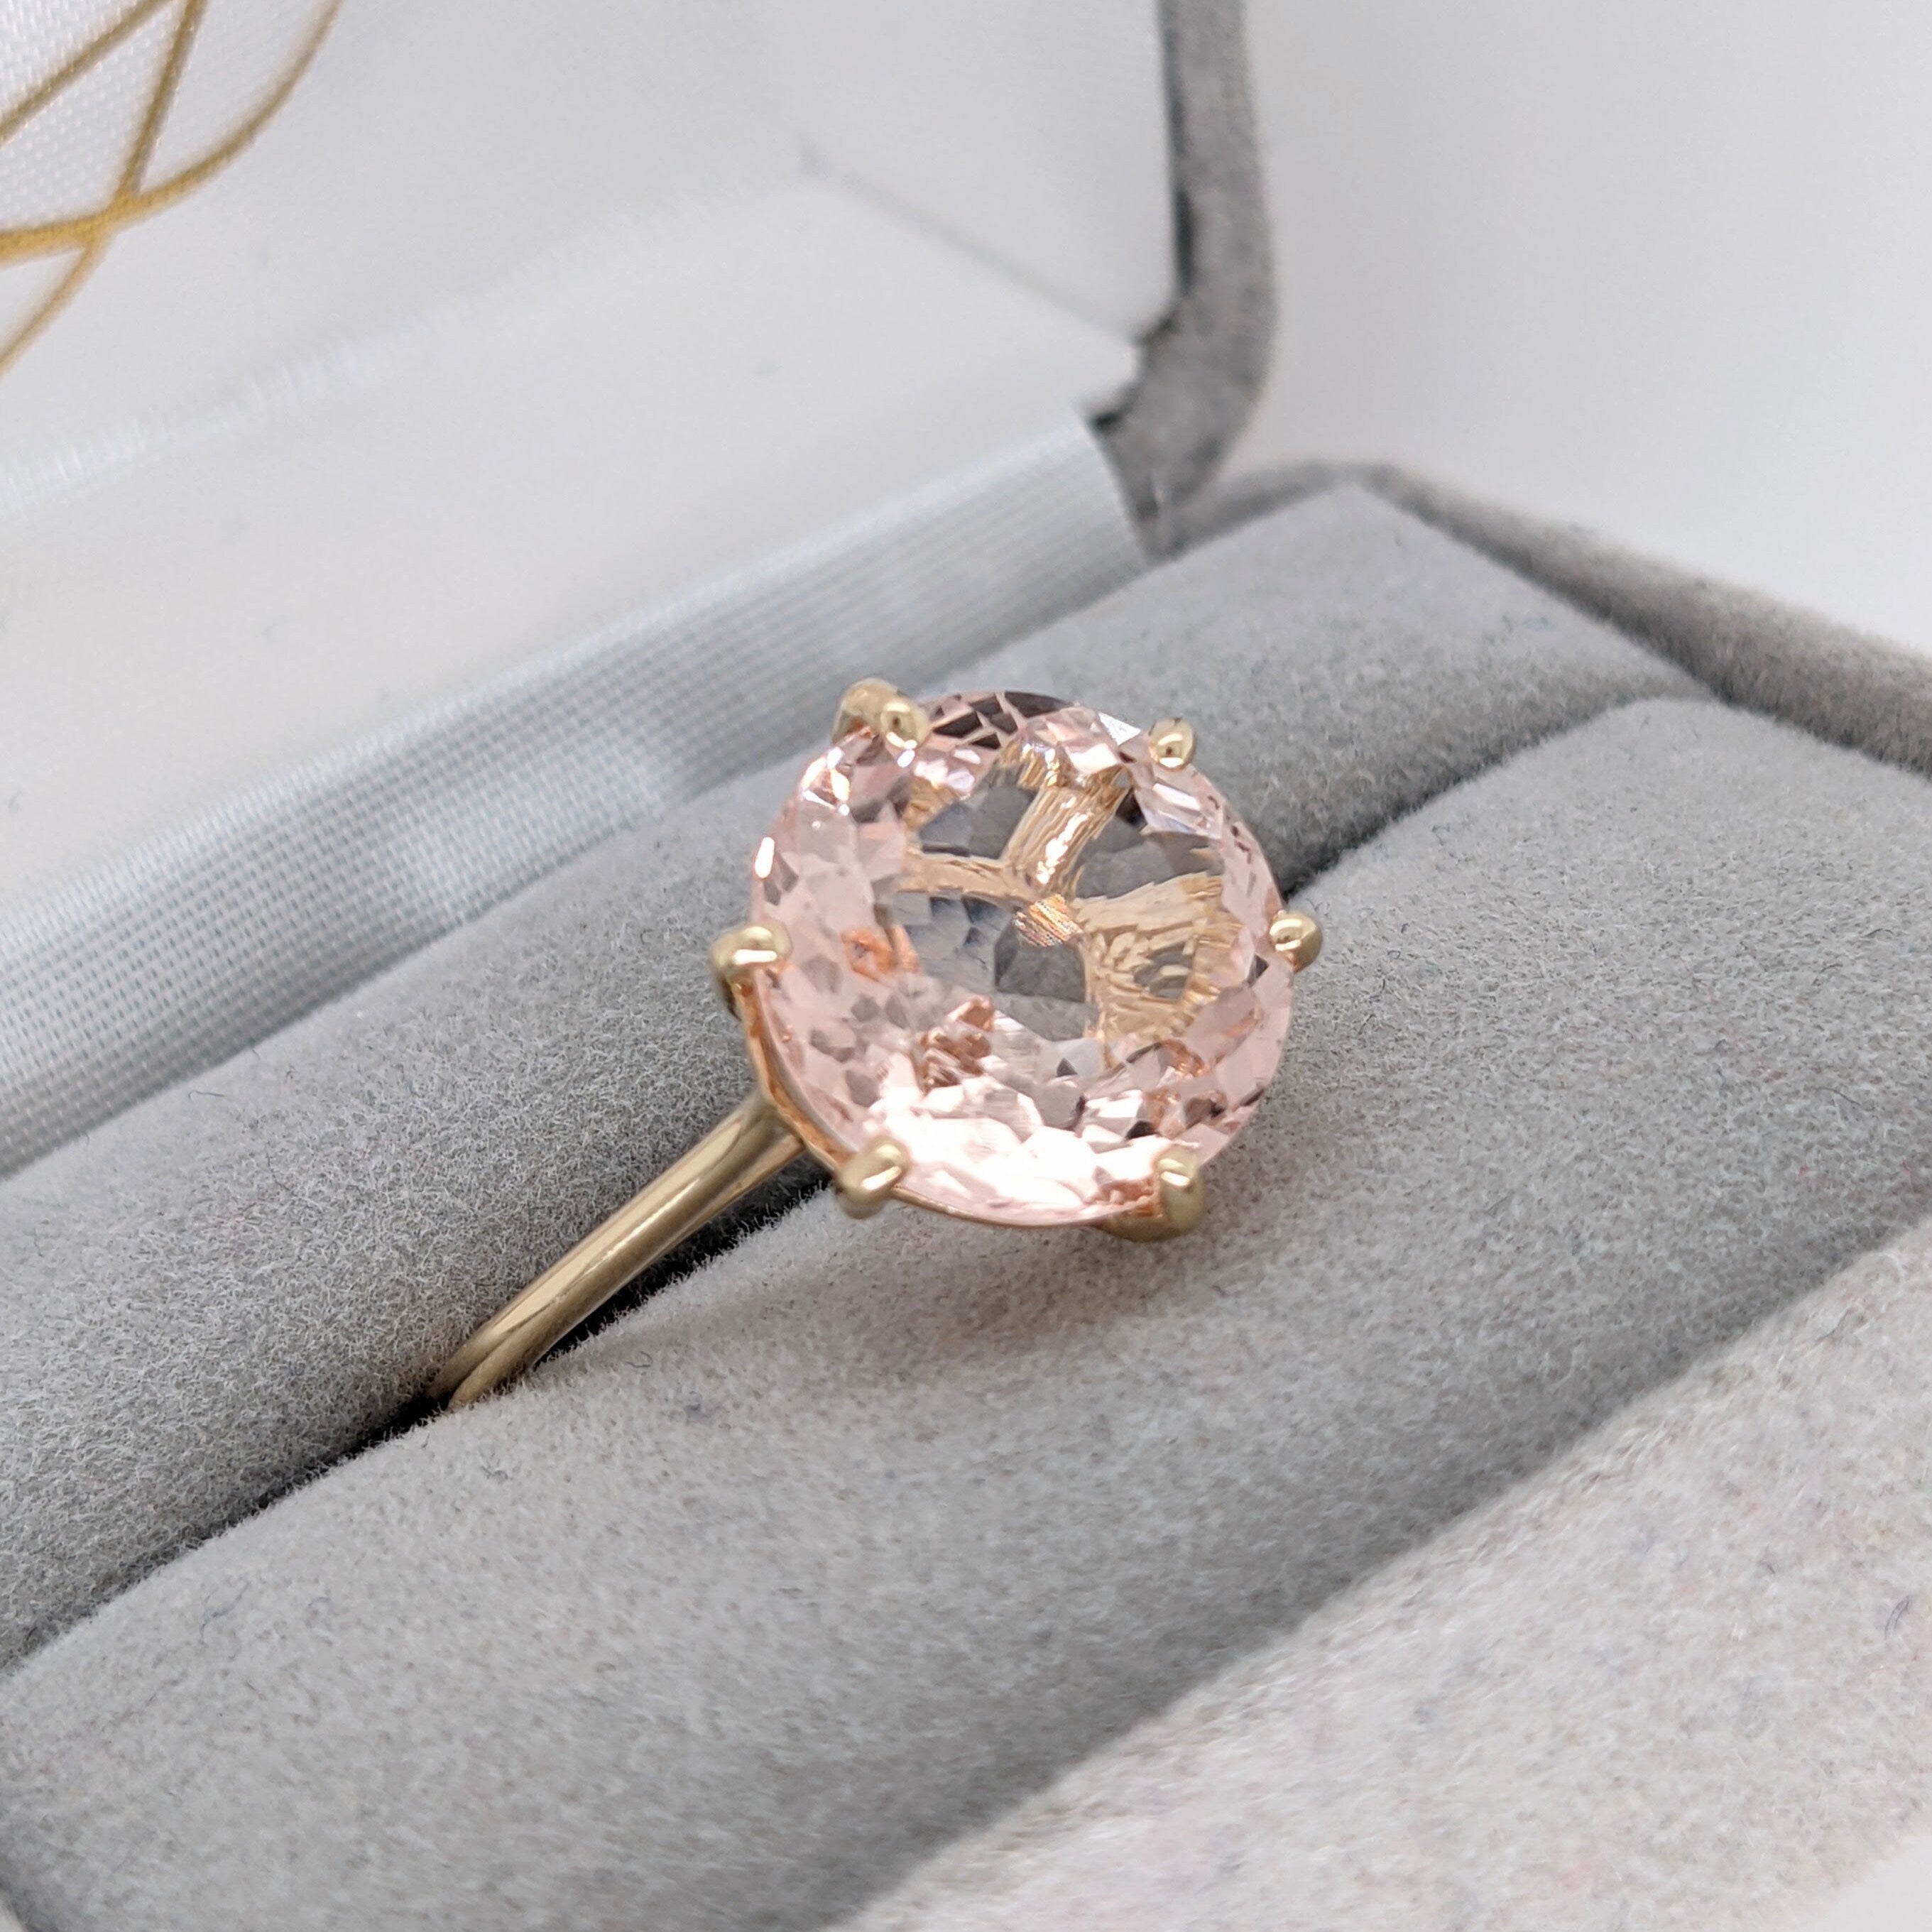 Peachy Pink Morganite Ring in Solid 14K Yellow Gold | Round Cut 11.5mm | Minimalist | Clean Design | 6 Prong Setting | Pink Gemstone